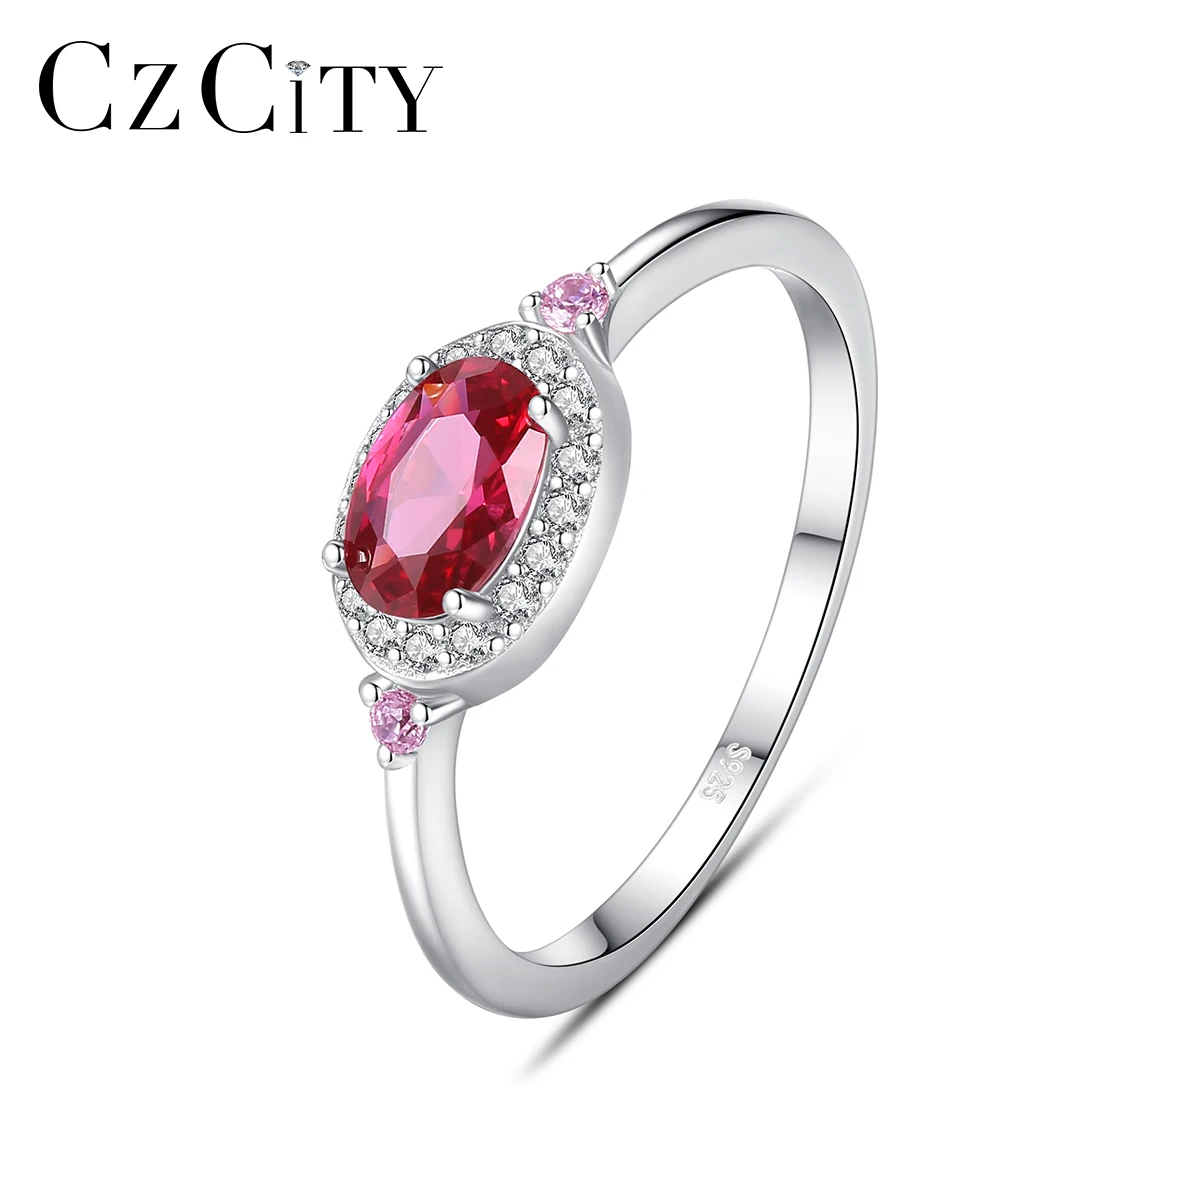 

CZCITY Wedding Rings Silver S925 Cute Dove Egg Shape Pink Color Ladies Gemstone Ring Wholesale